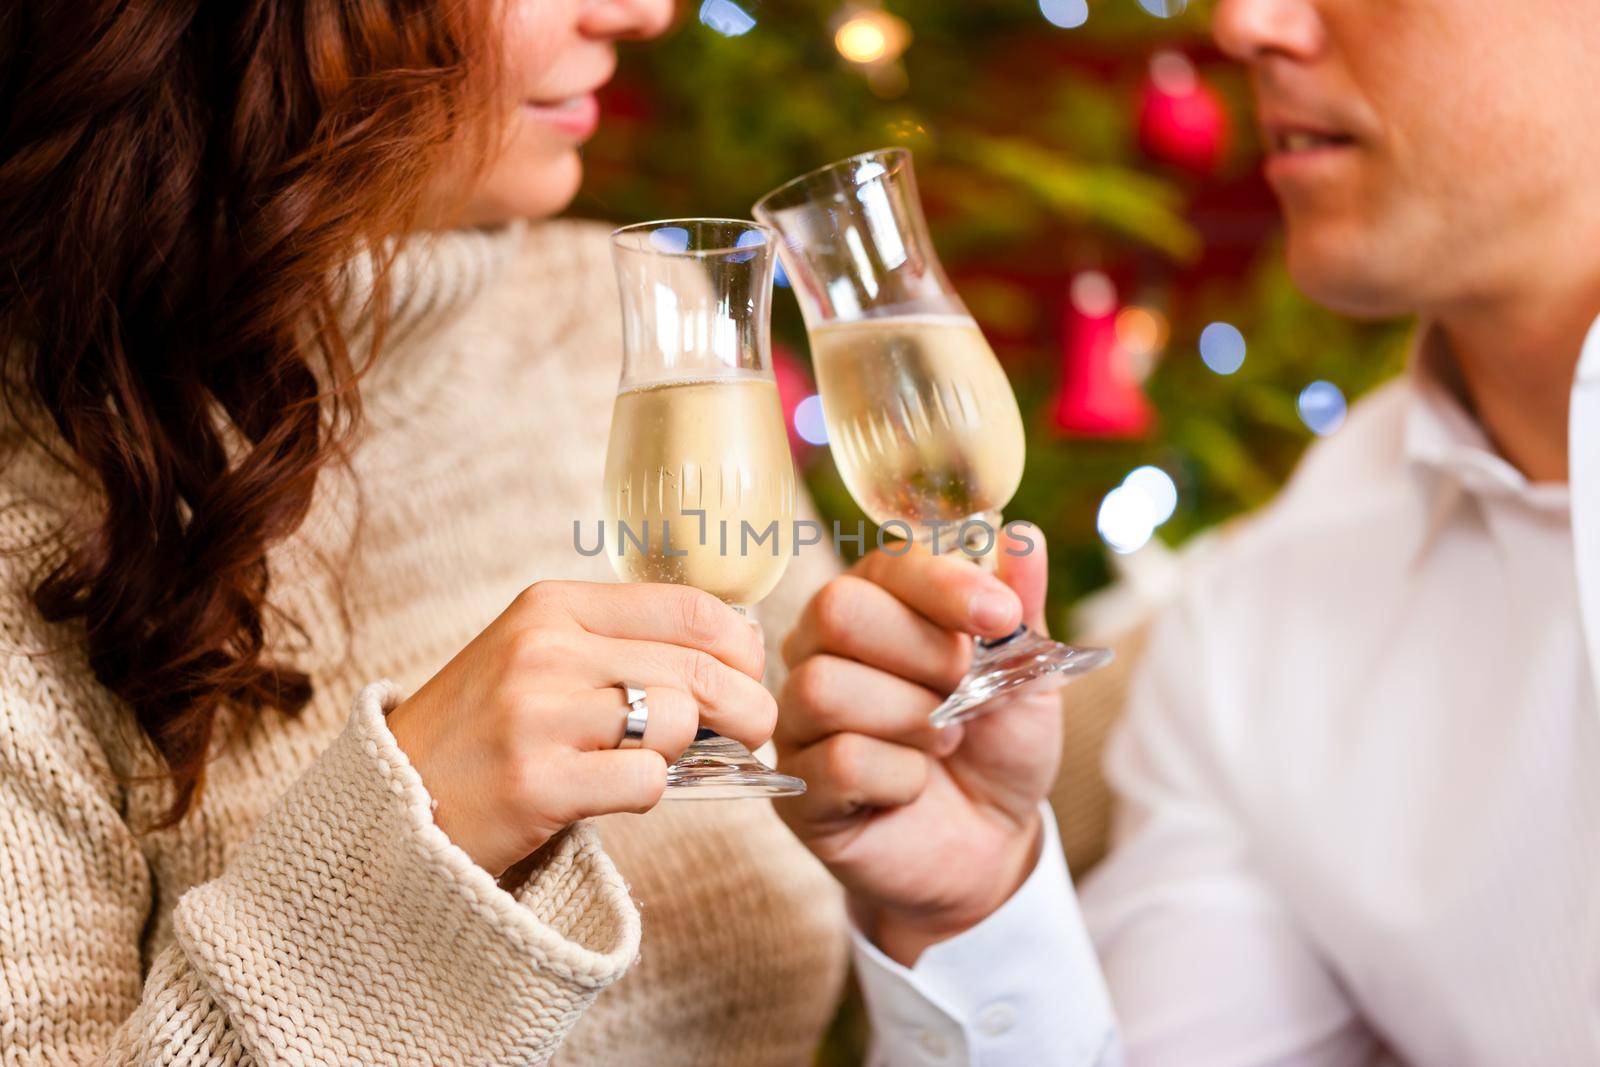 Couple clinking glasses with champagne on Christmas Eve and giving gifts to each other